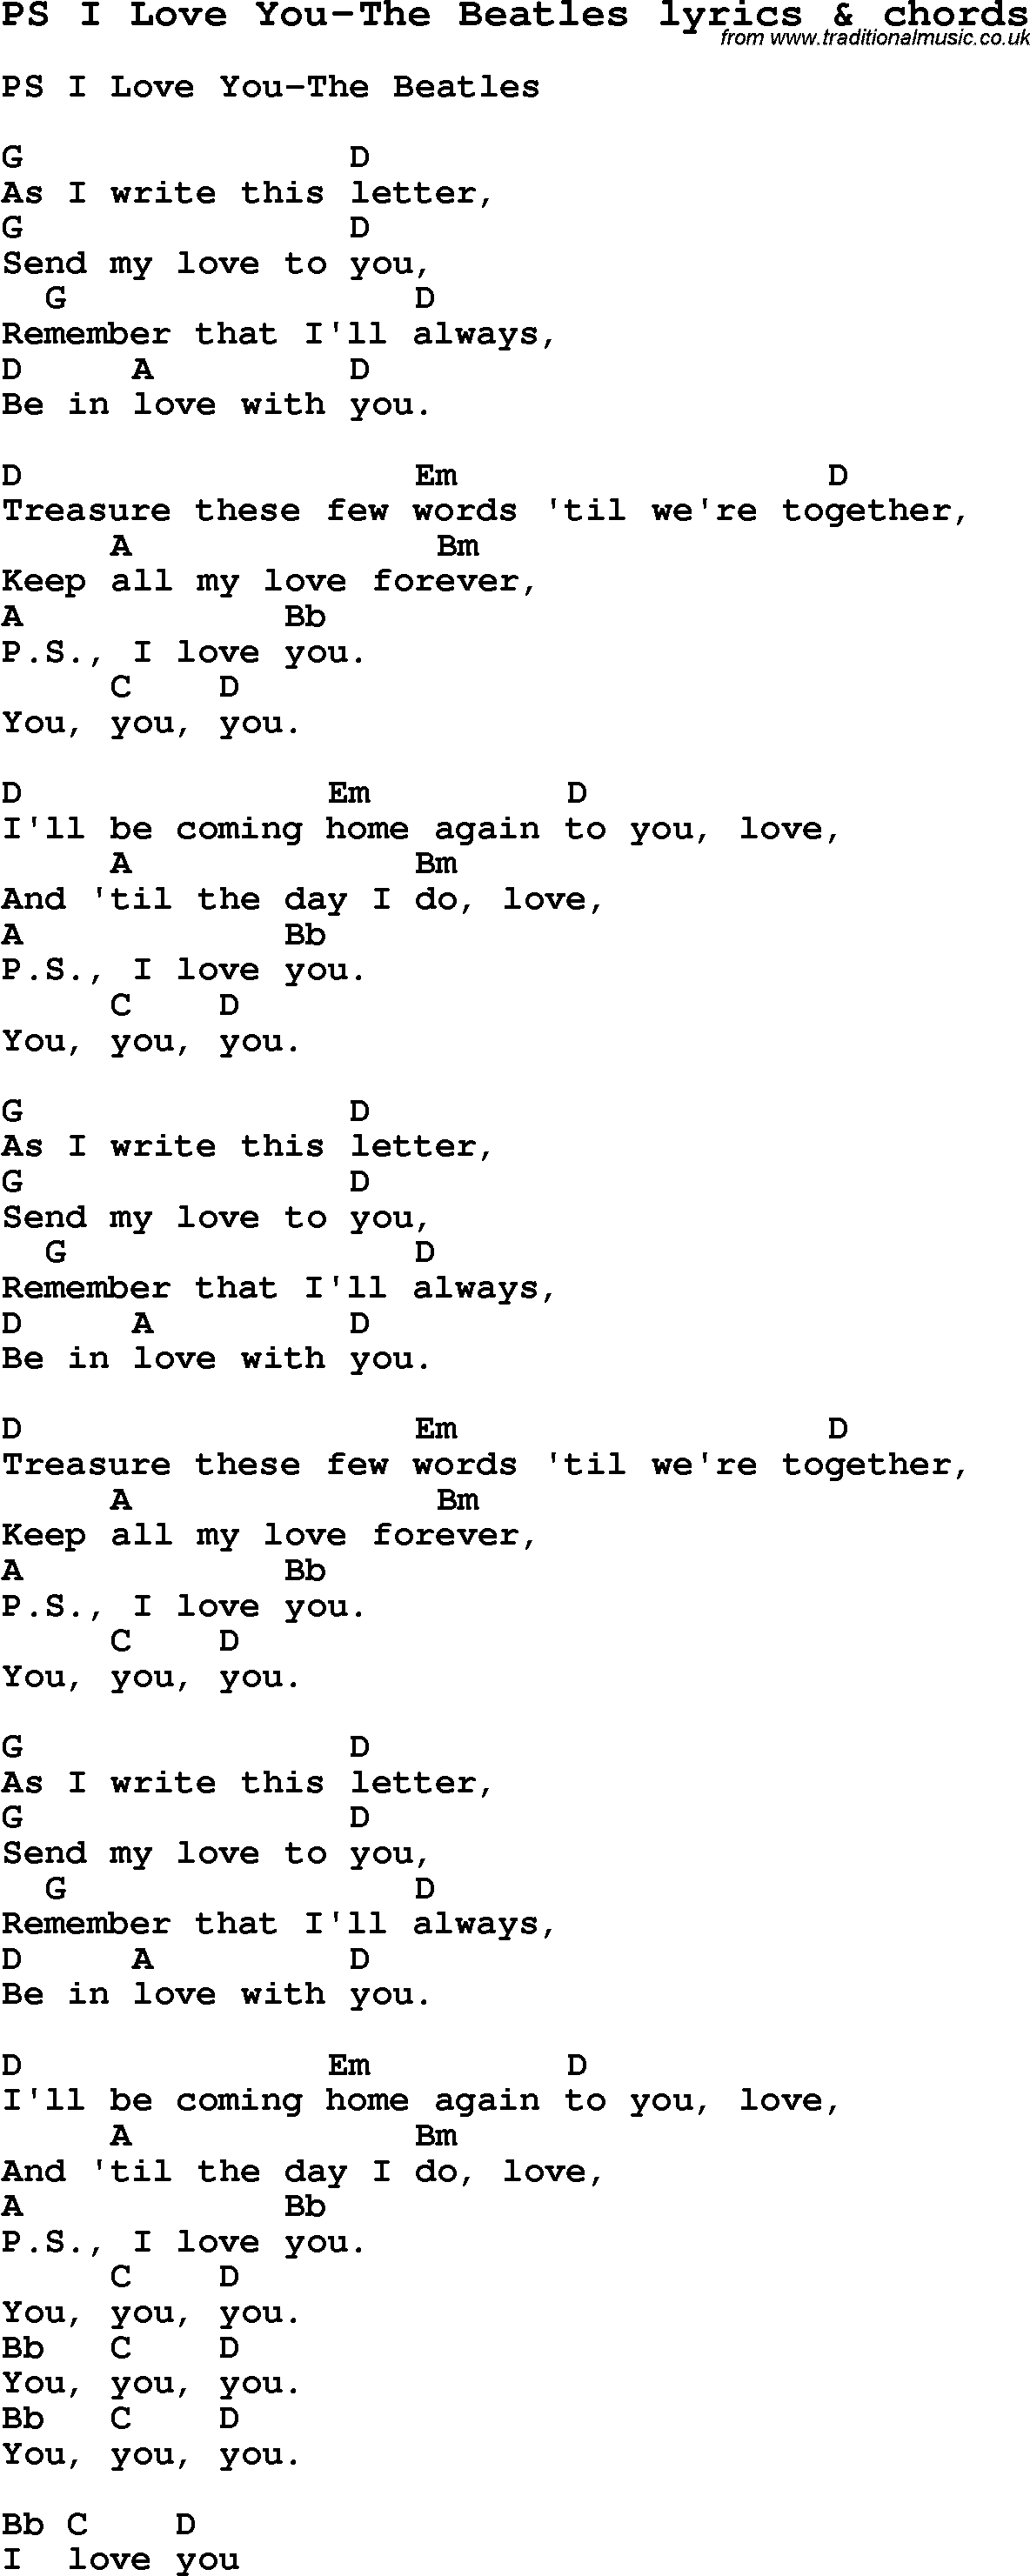 Love Song Lyrics for: PS I Love You-The Beatles with chords for Ukulele, Guitar Banjo etc.